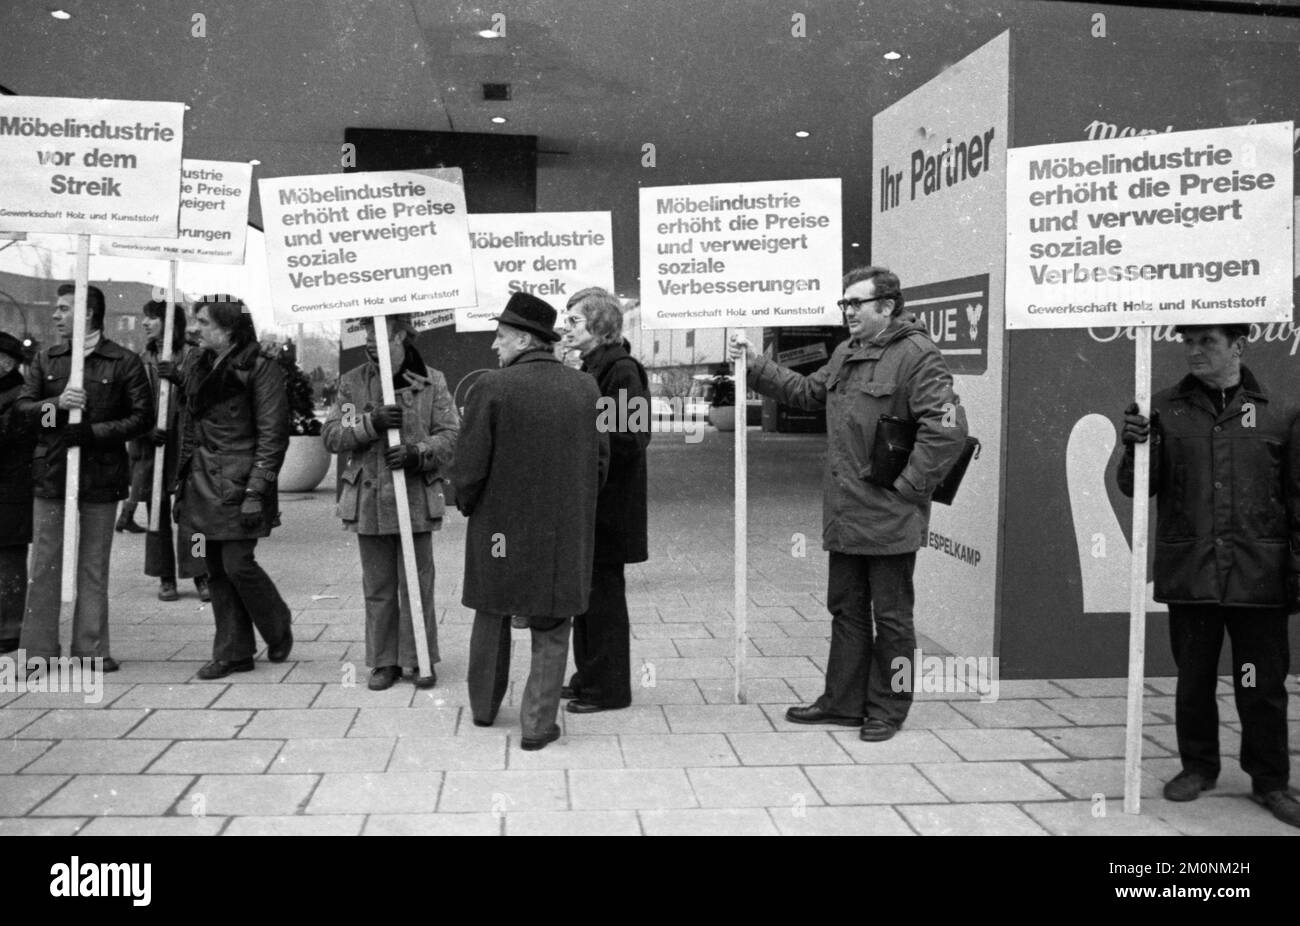 In the collective bargaining dispute of the wood and plastics union, members of IG Holz und Kunststoff protested with their chairman Kurt Georgi in fr Stock Photo